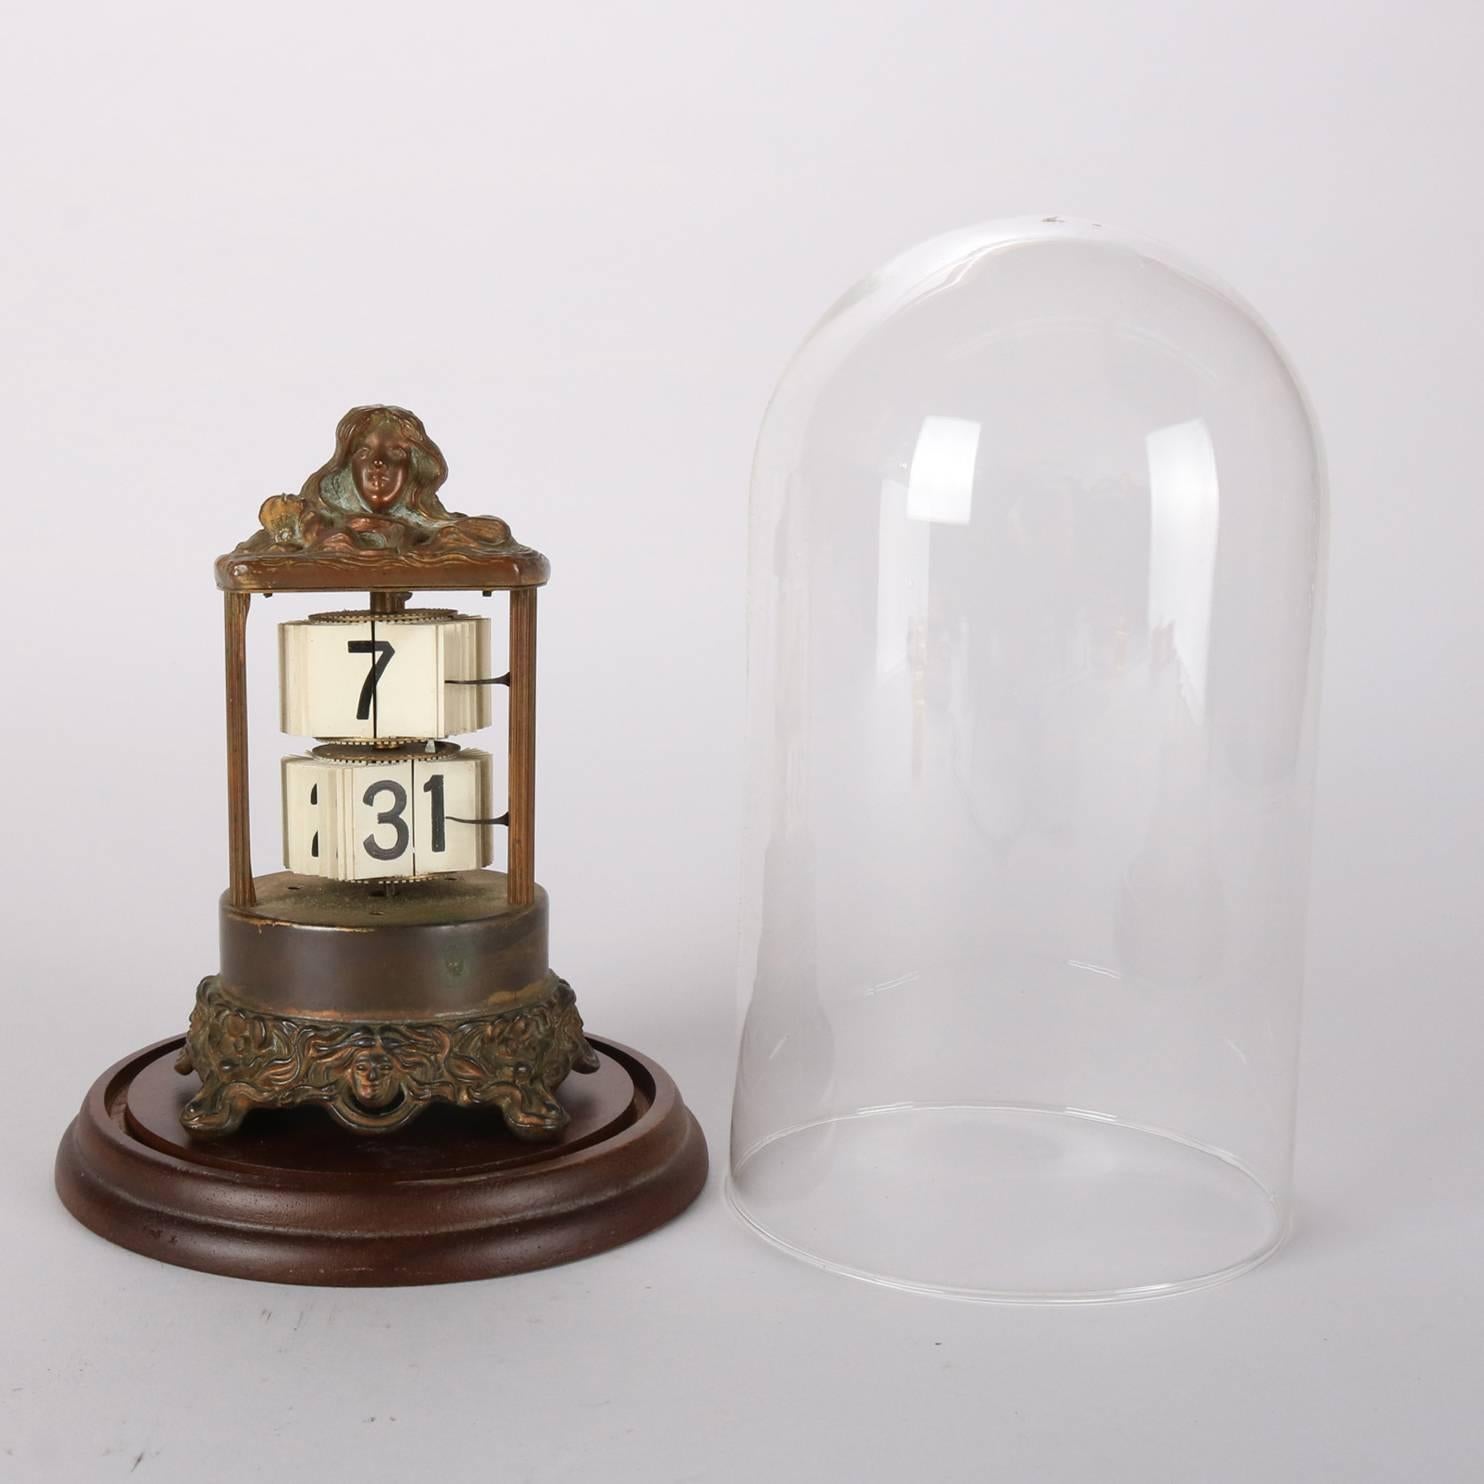 Antique Art Nouveau figural Plato flip ticket desk clock features bronzed frame with female bust finial and seated on pierced foliate base with four feet, housed in dome, decorative piece (see condition), early 20th century.

Measures - 9"H x